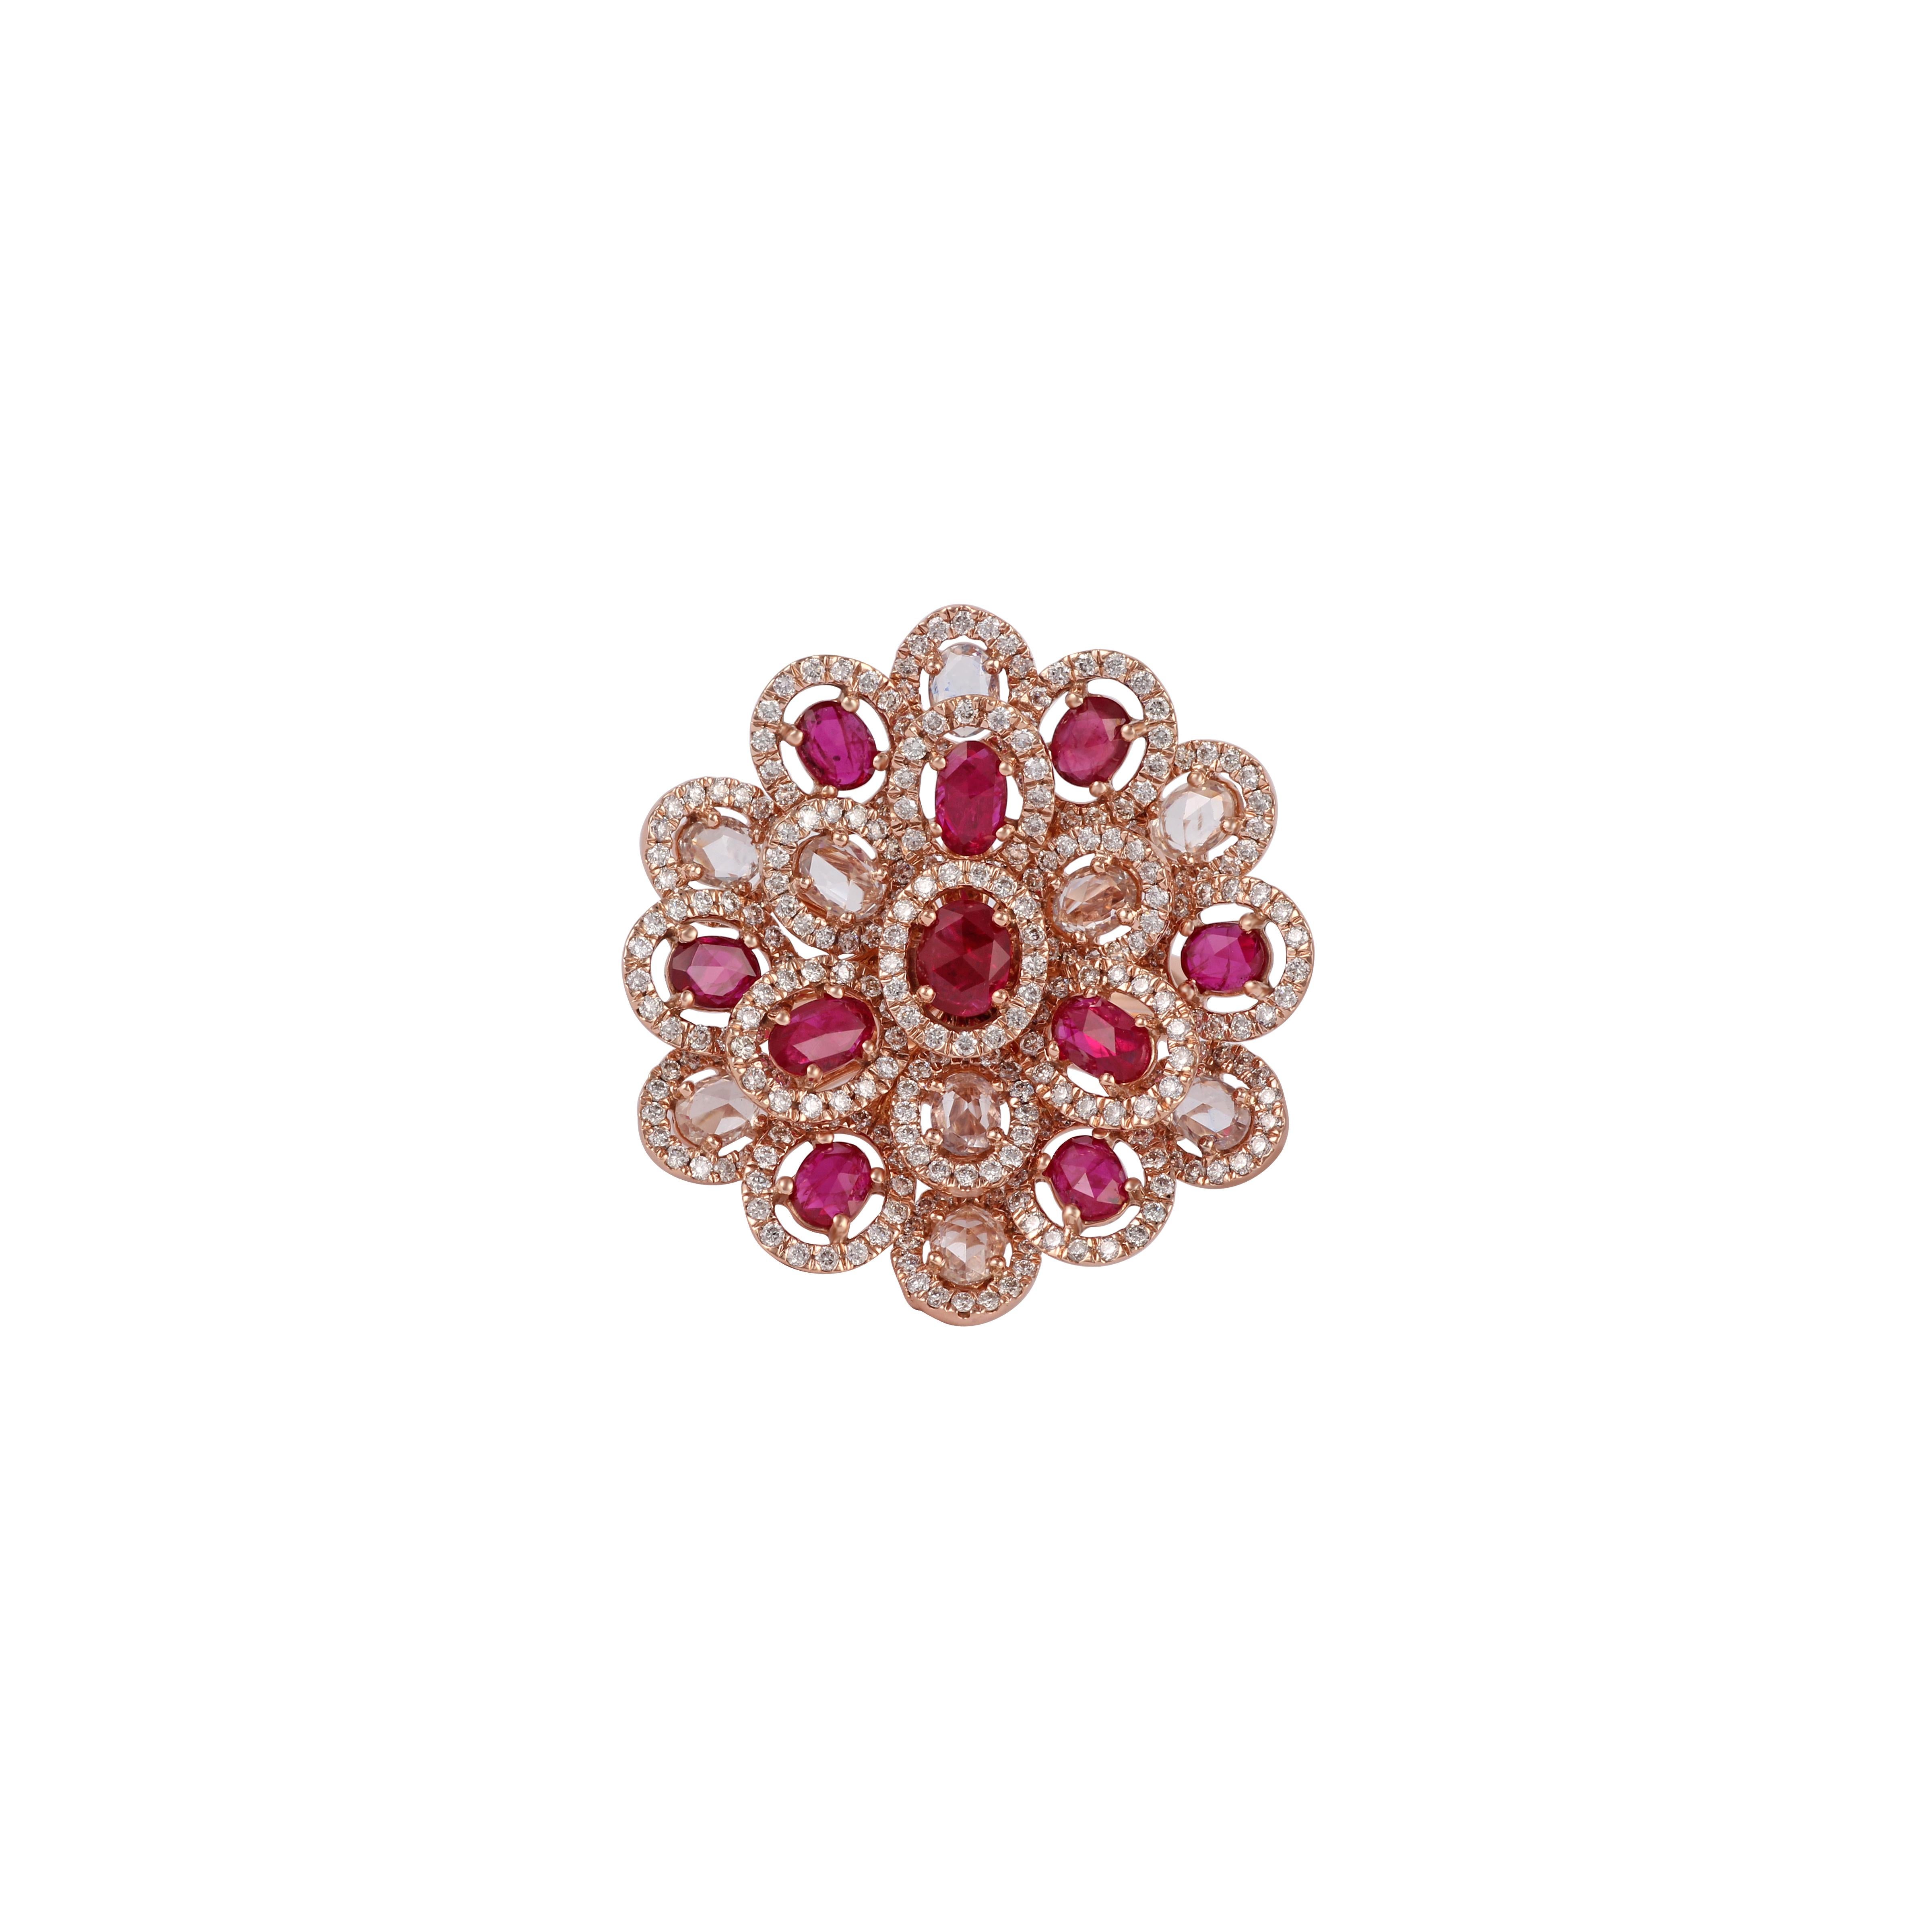 Its an exclusive cocktail ring studded in 18k rose gold with 10 pieces oval shaped rose cut rubies weight 2.01 carat & 9 pieces oval shaped rose cut white sapphires weight 1.39 carat with 302 pieces of round shaped brilliant cut diamond weight 1.46